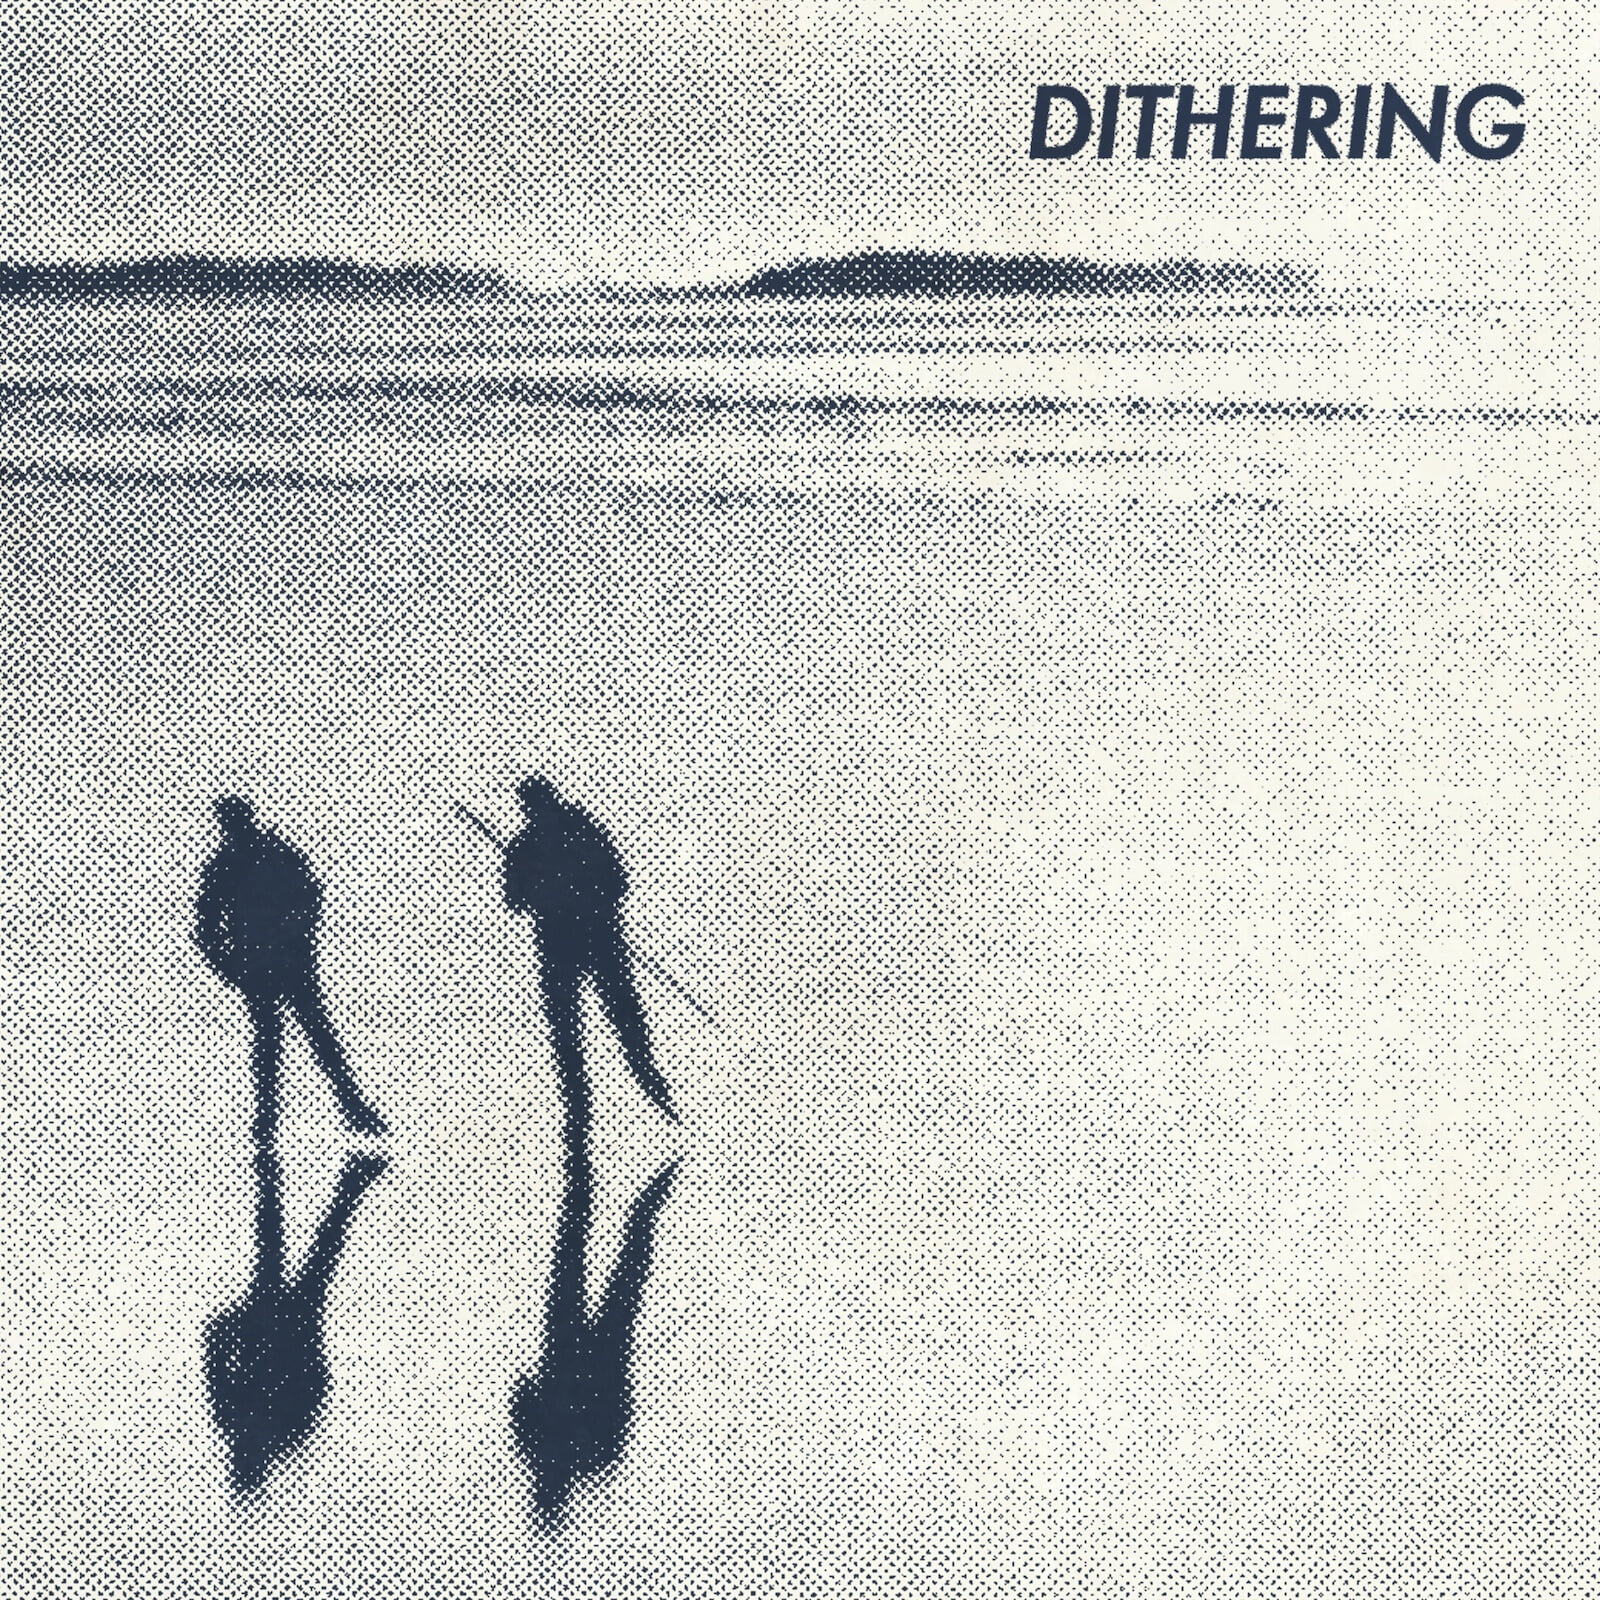 February 2022 cover art for Dithering, depicting two people skating together across a frozen pond.